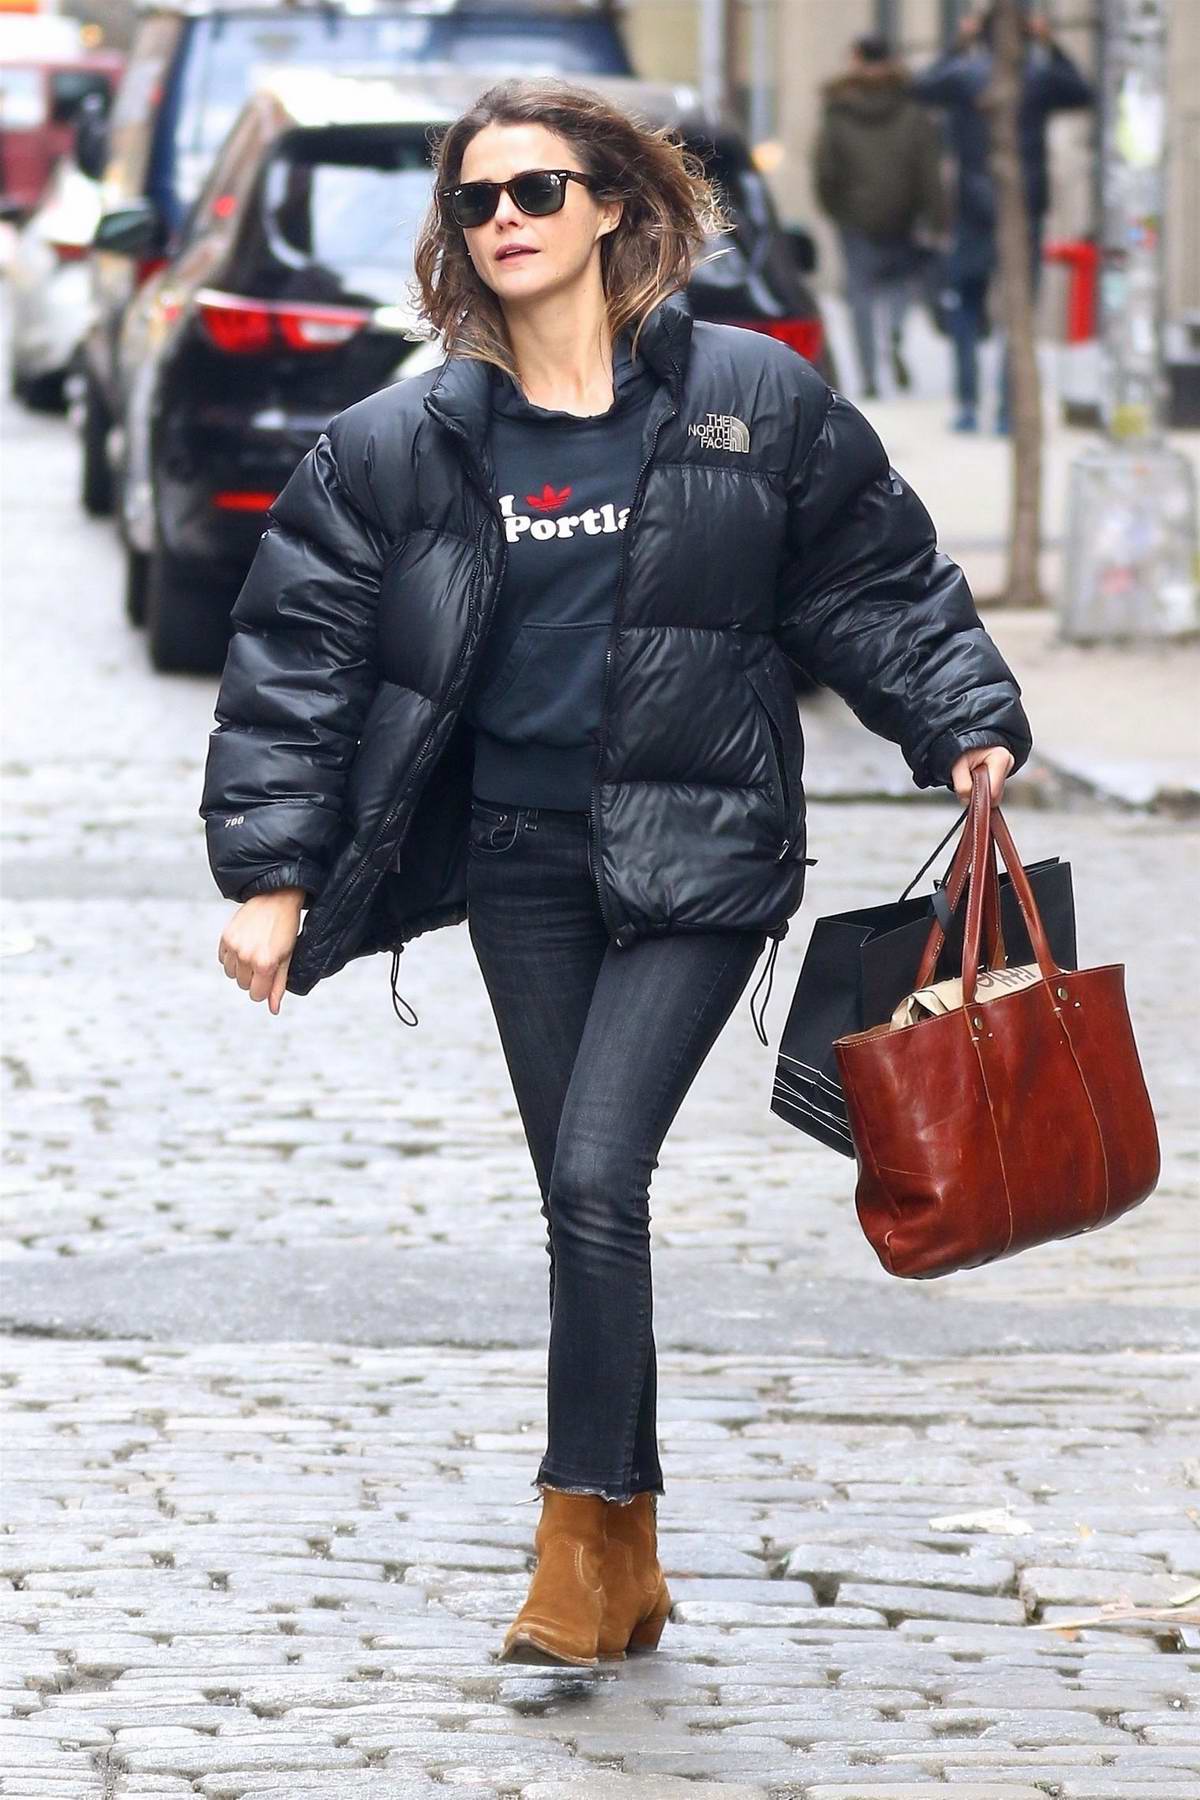 keri russell wore a black puffer jacket while out shopping for